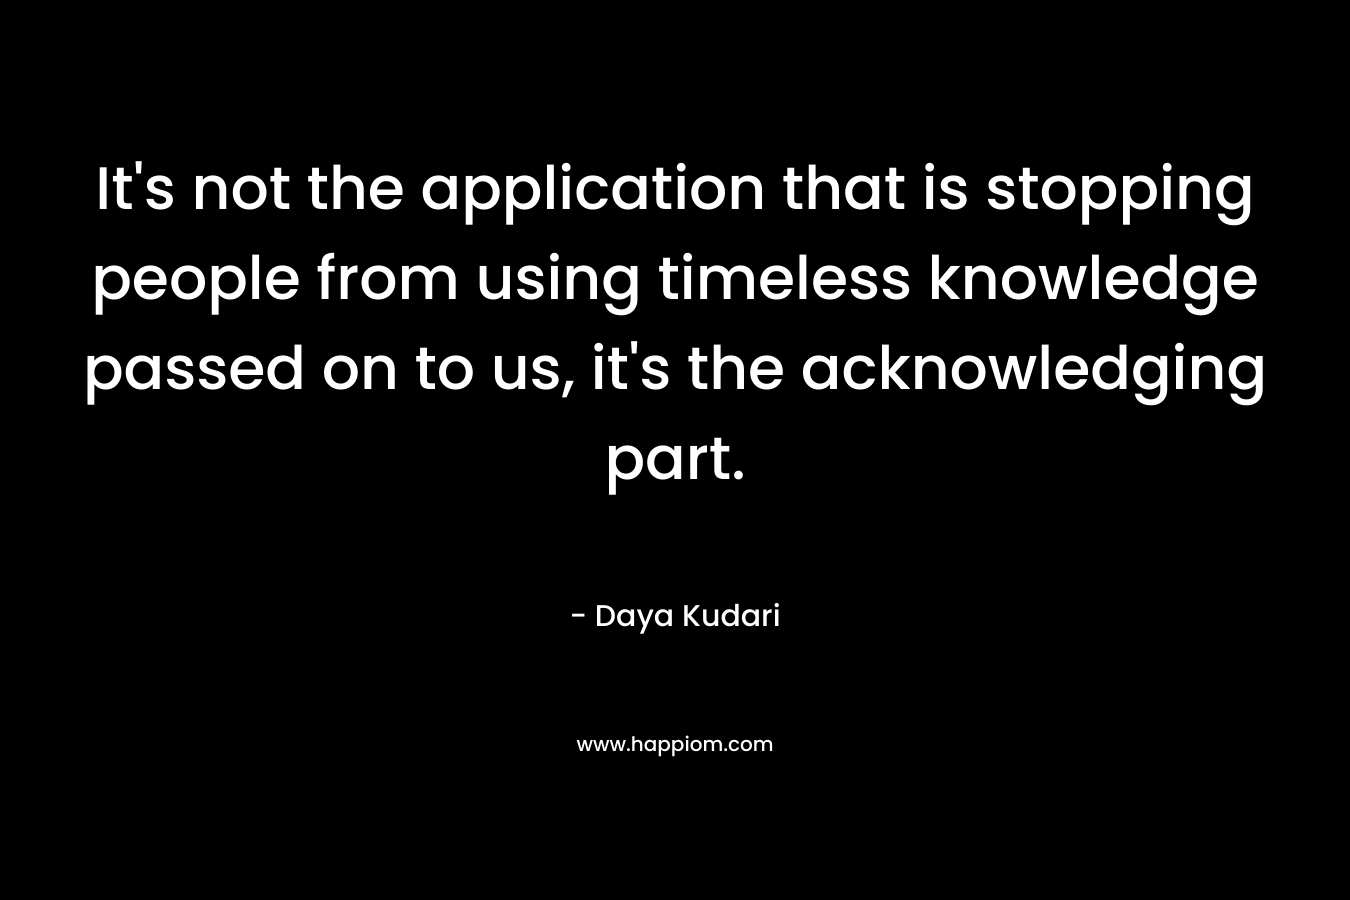 It's not the application that is stopping people from using timeless knowledge passed on to us, it's the acknowledging part.